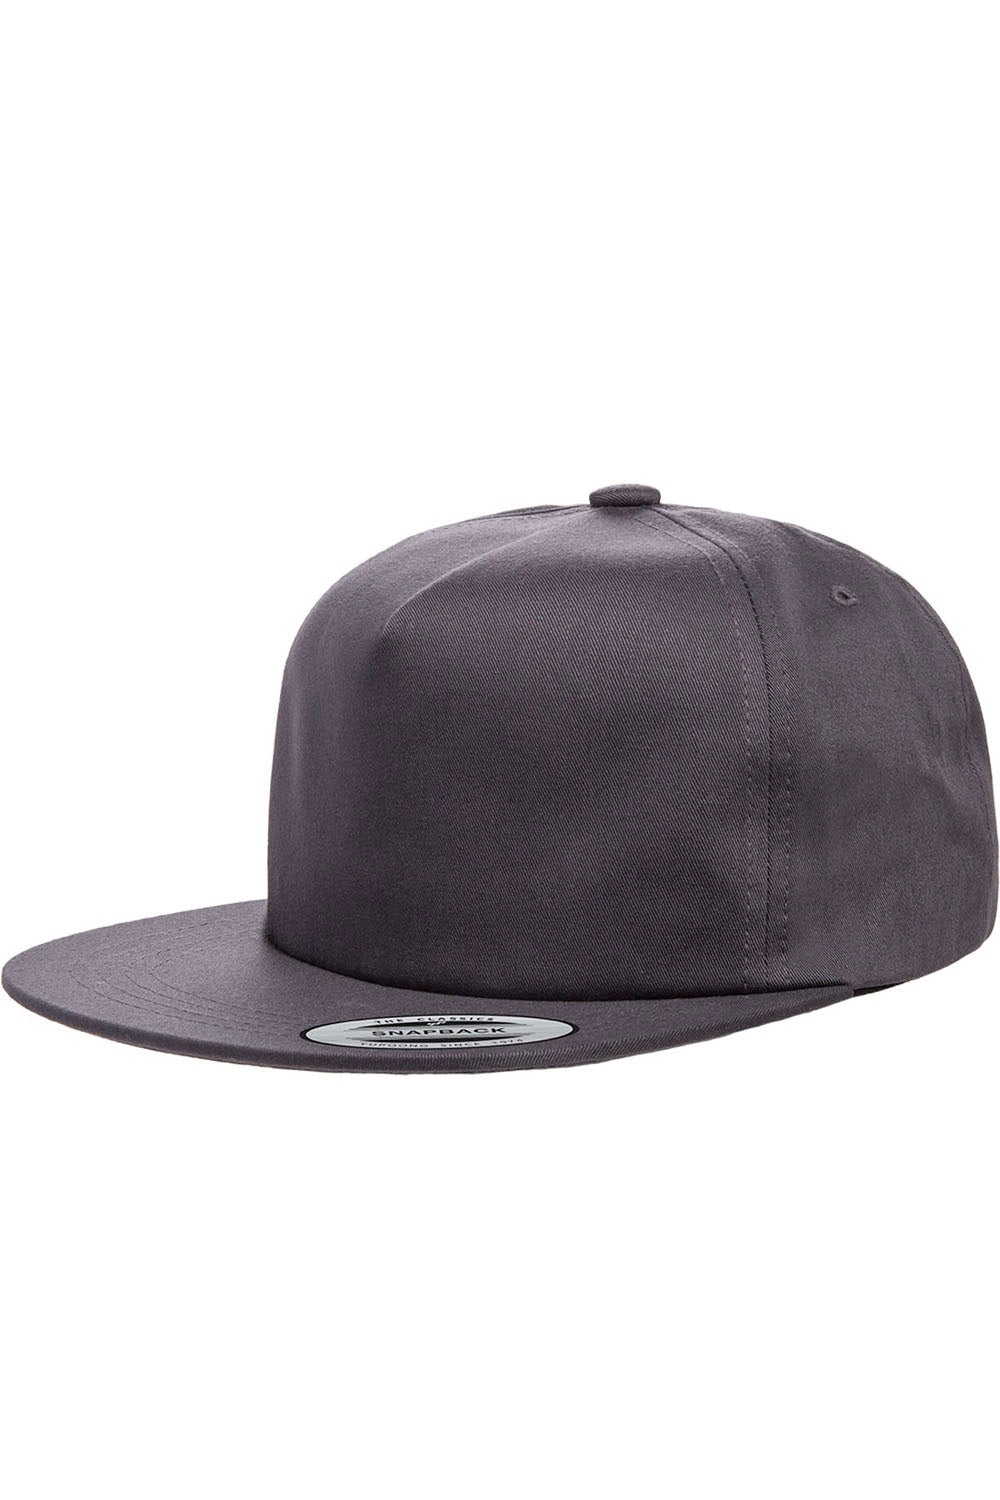 Yupoong Y6502 Mens Adjustable Hat Charcoal Grey Front